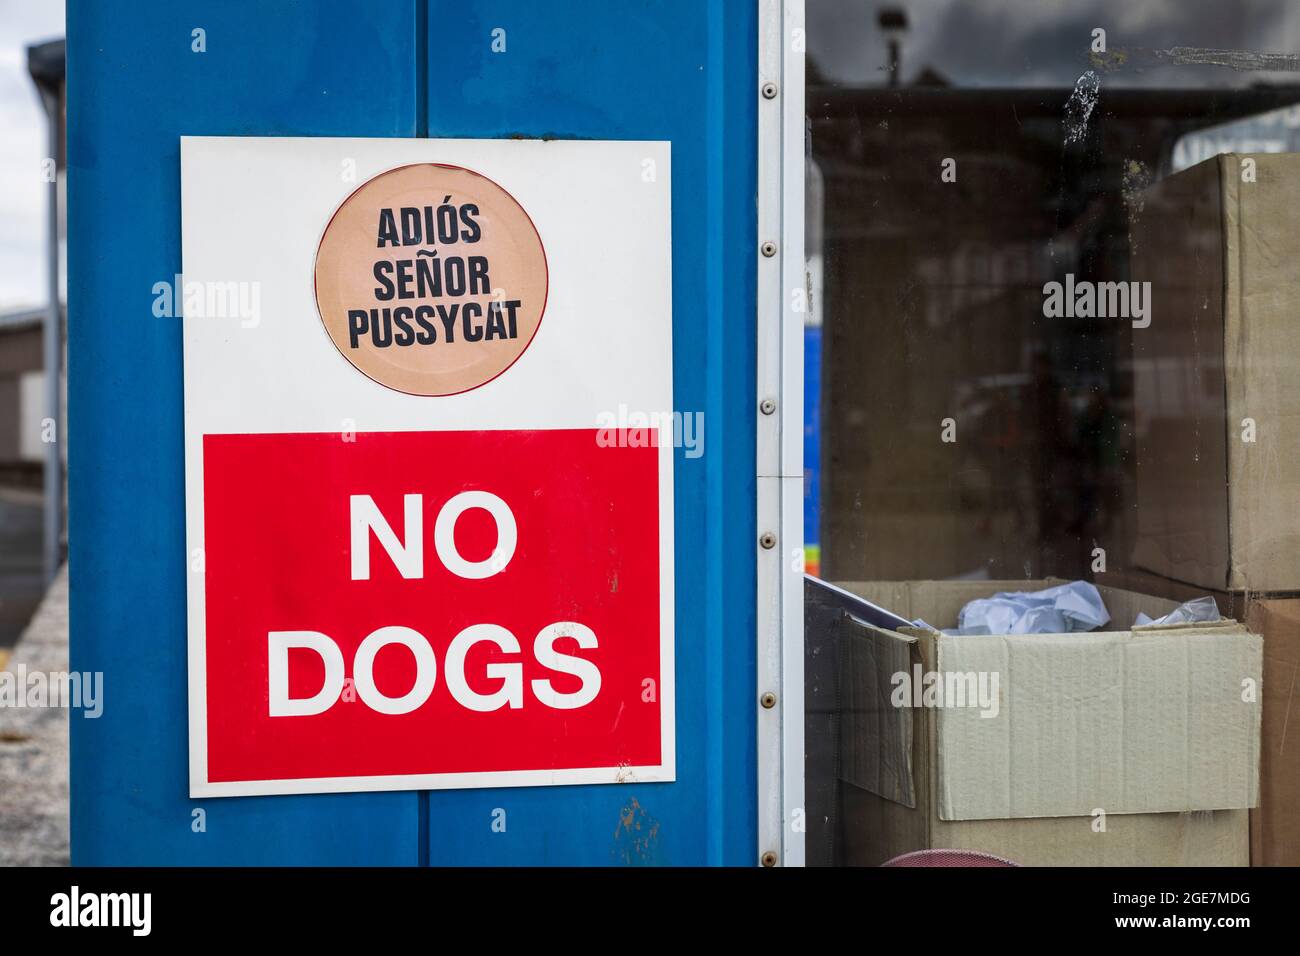 Sign warning of 'No Dogs' and 'goodbye to cats' in Spanish 'Adios senor pussycat', Cornwall. Stock Photo